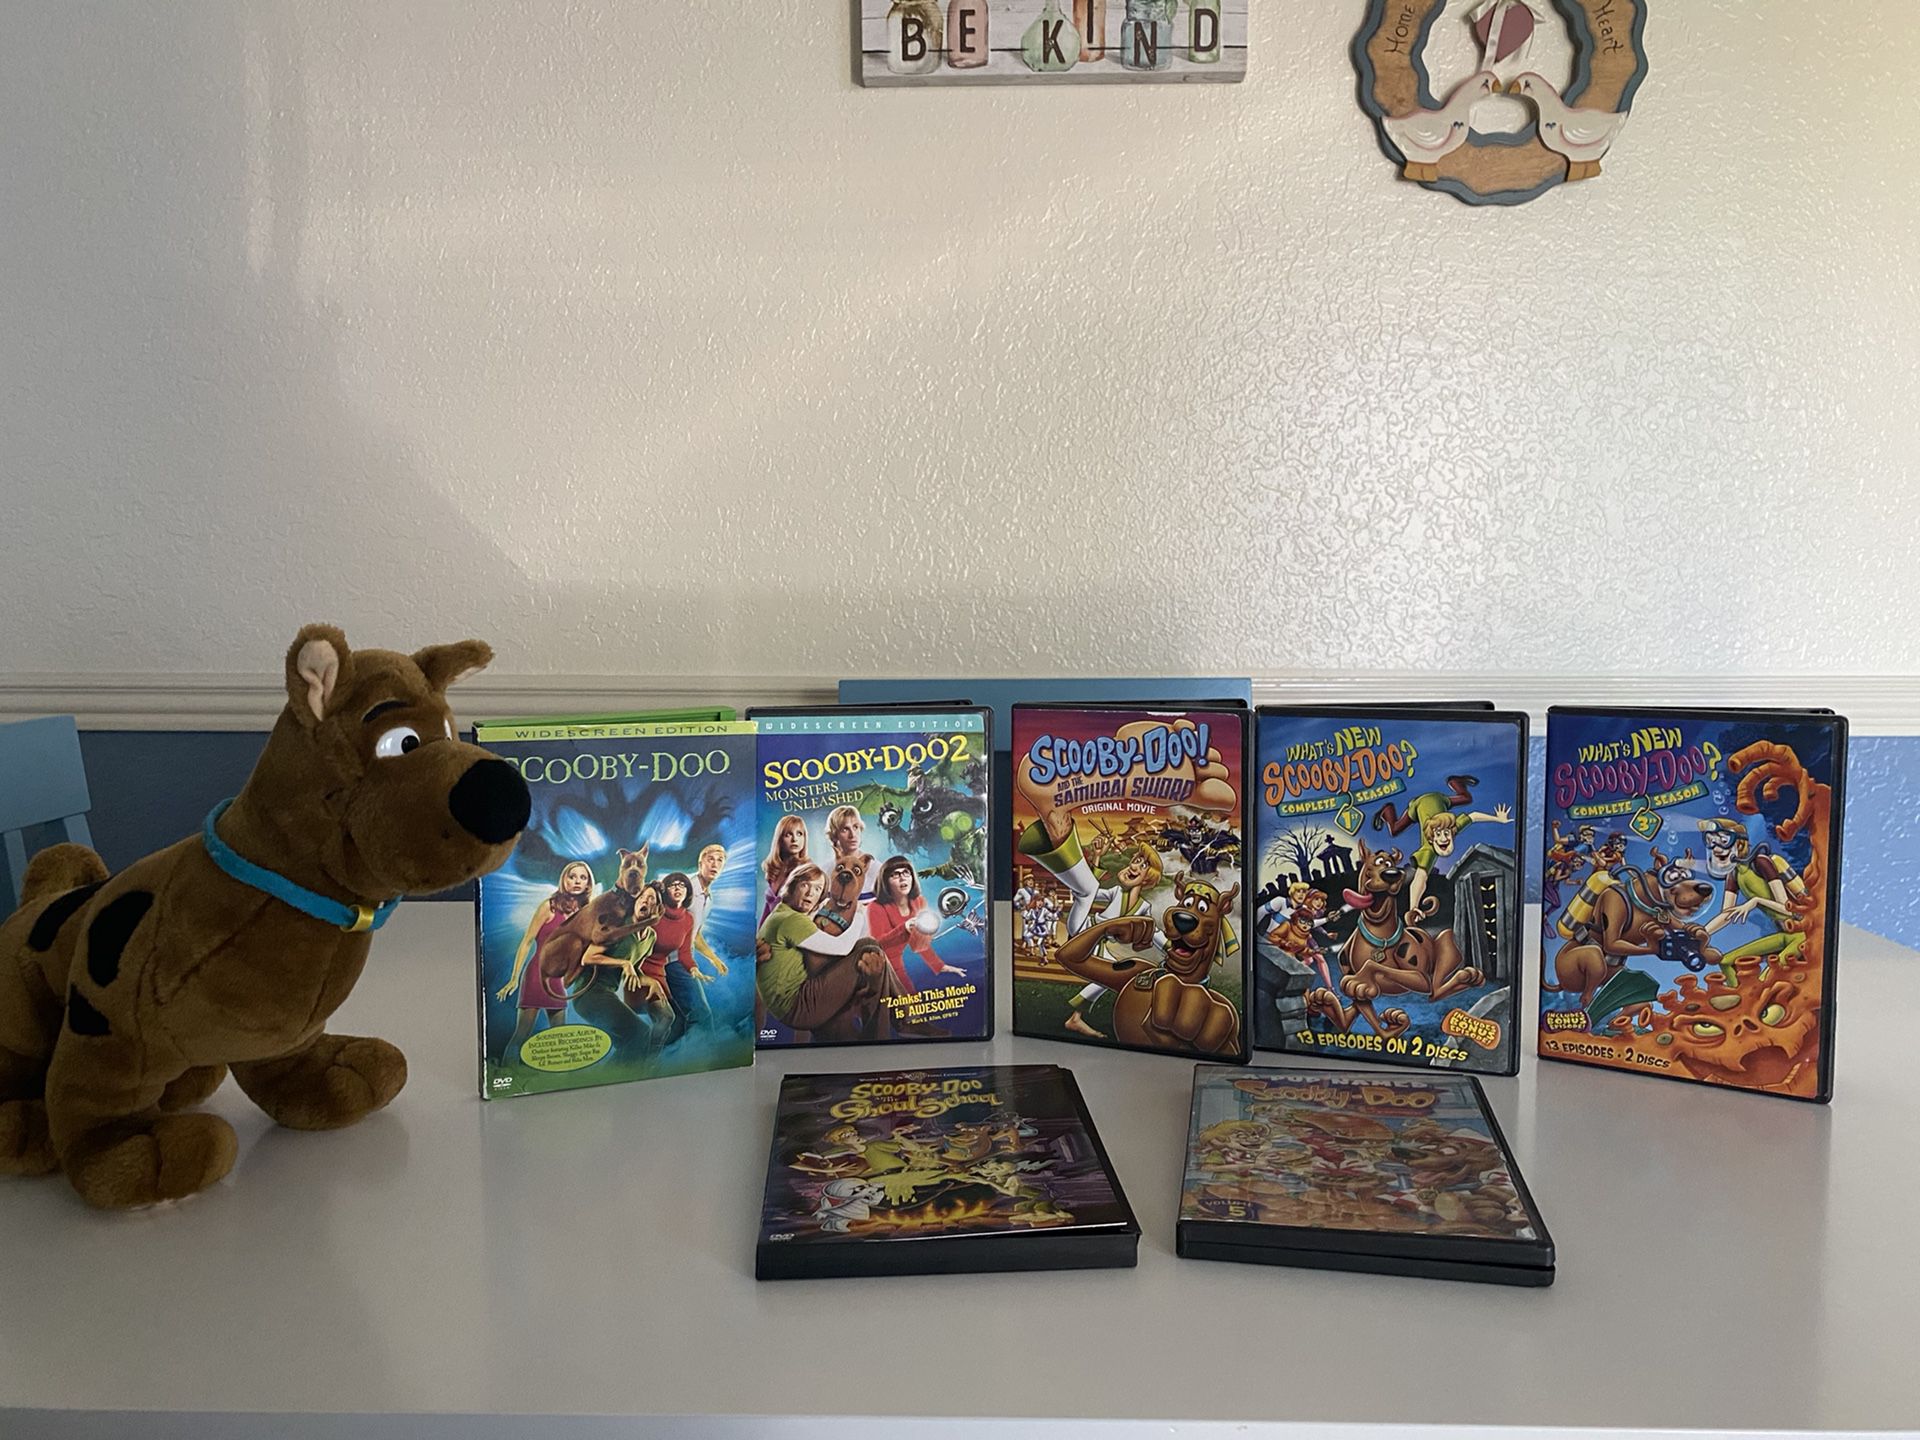 Scooby DVD movies 1&2 plus 5 more DVD & stuffed Scooby